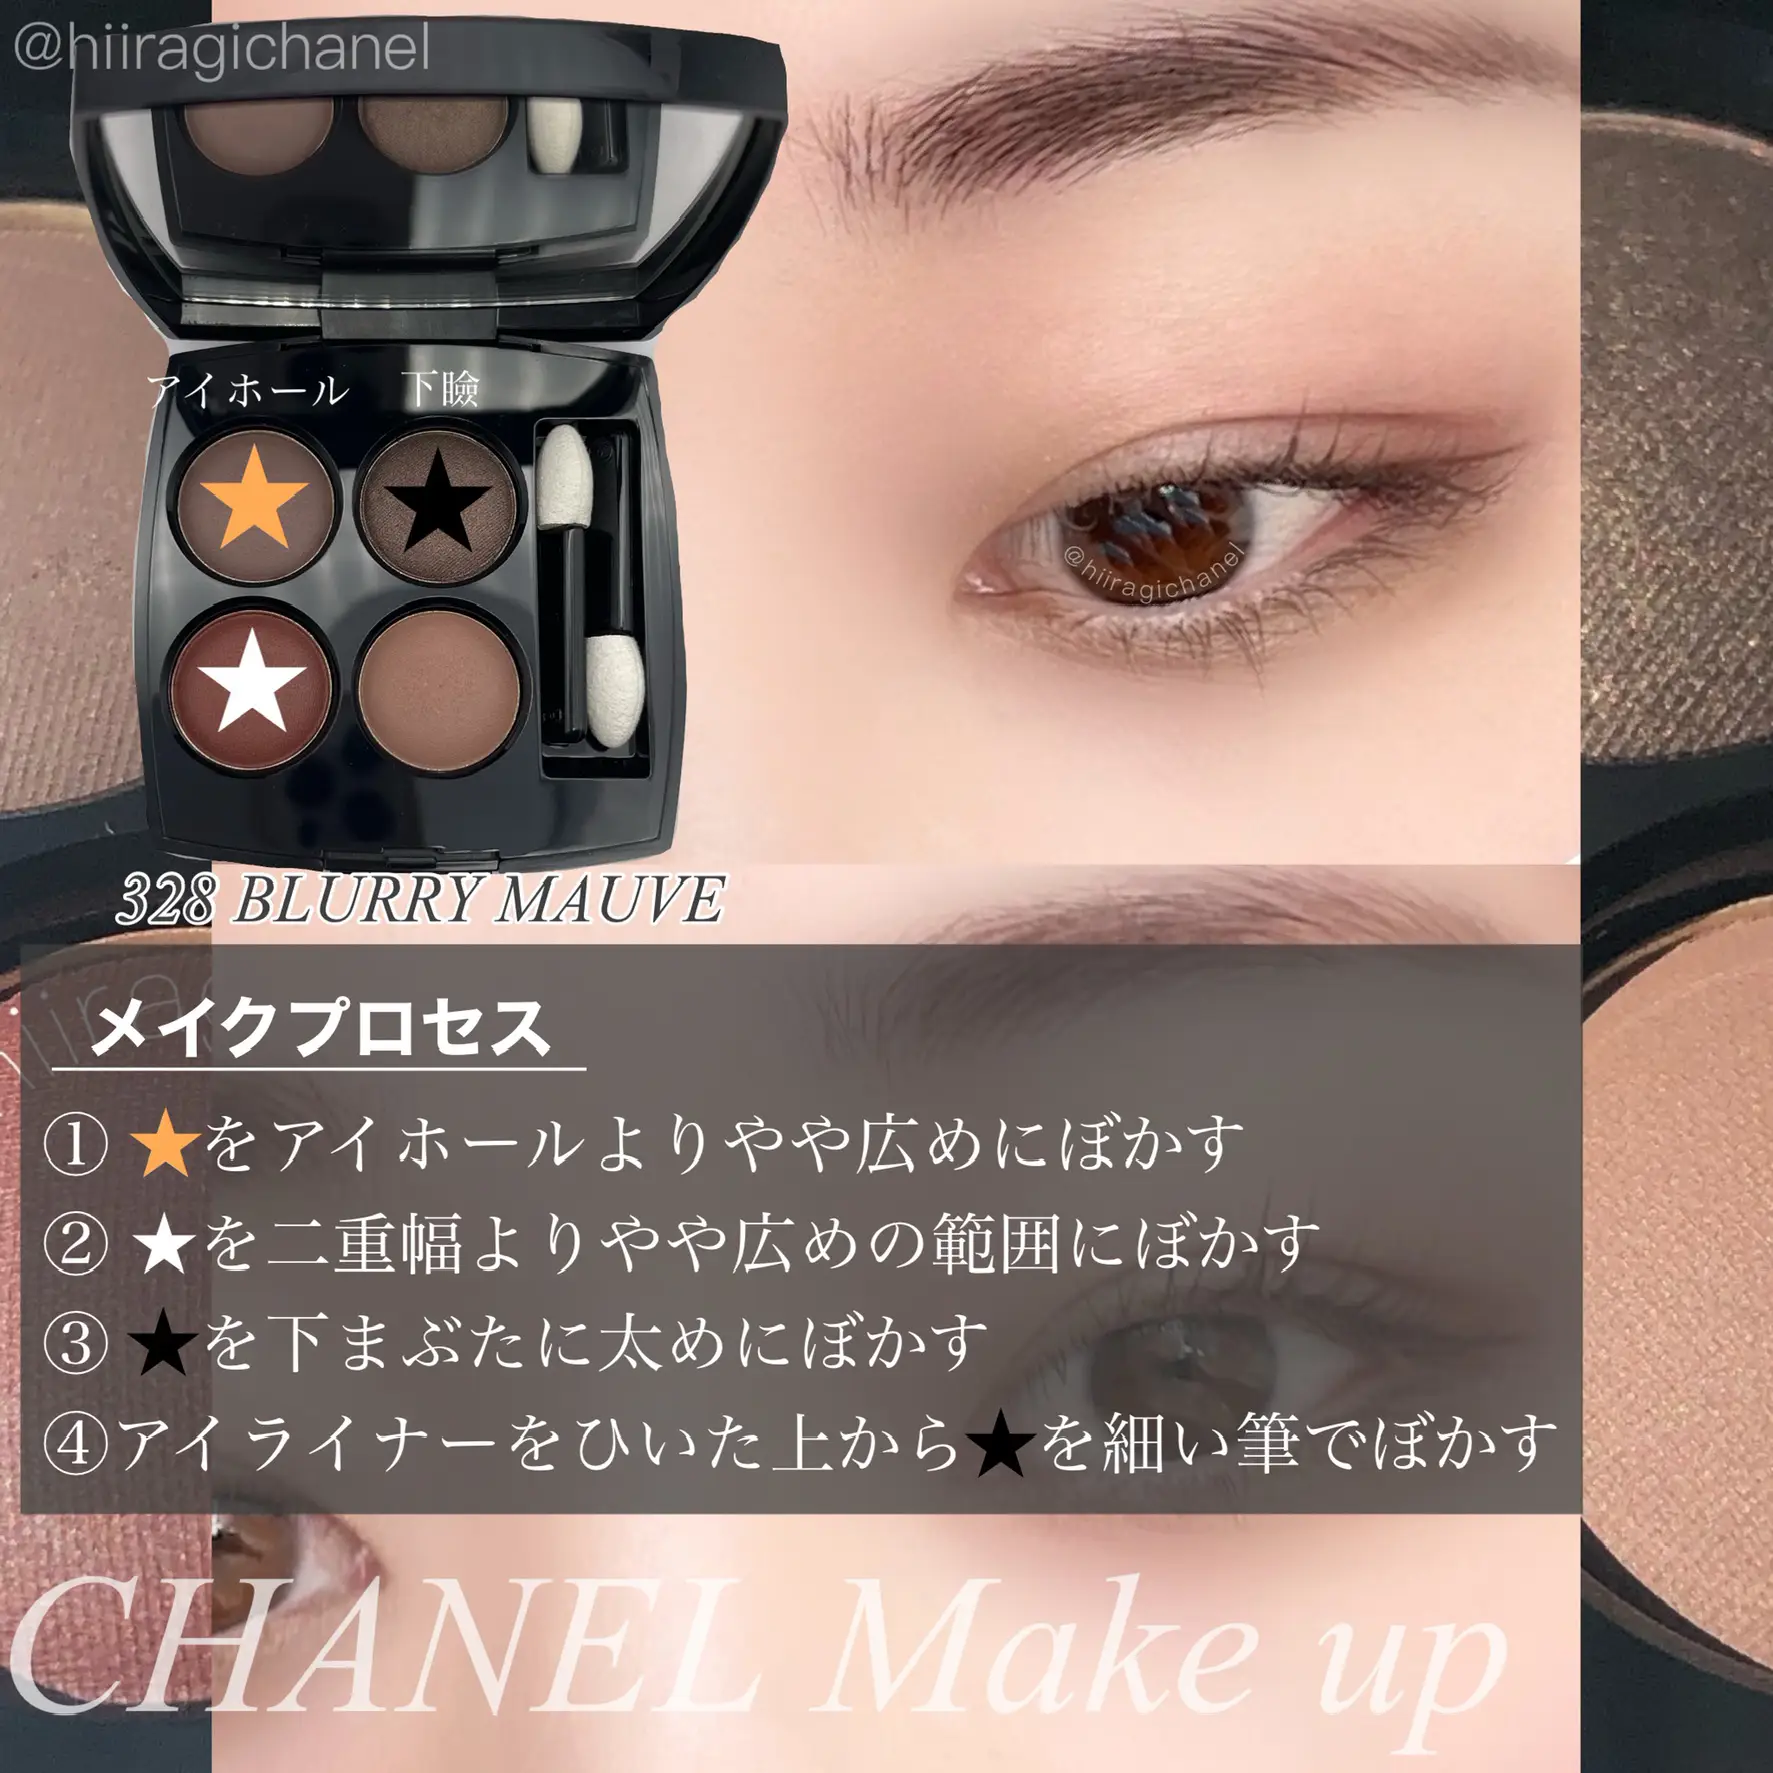 CHANEL Makeup 】 328 Brahley Mauve💄, Gallery posted by ひいらぎ💄美容オタク